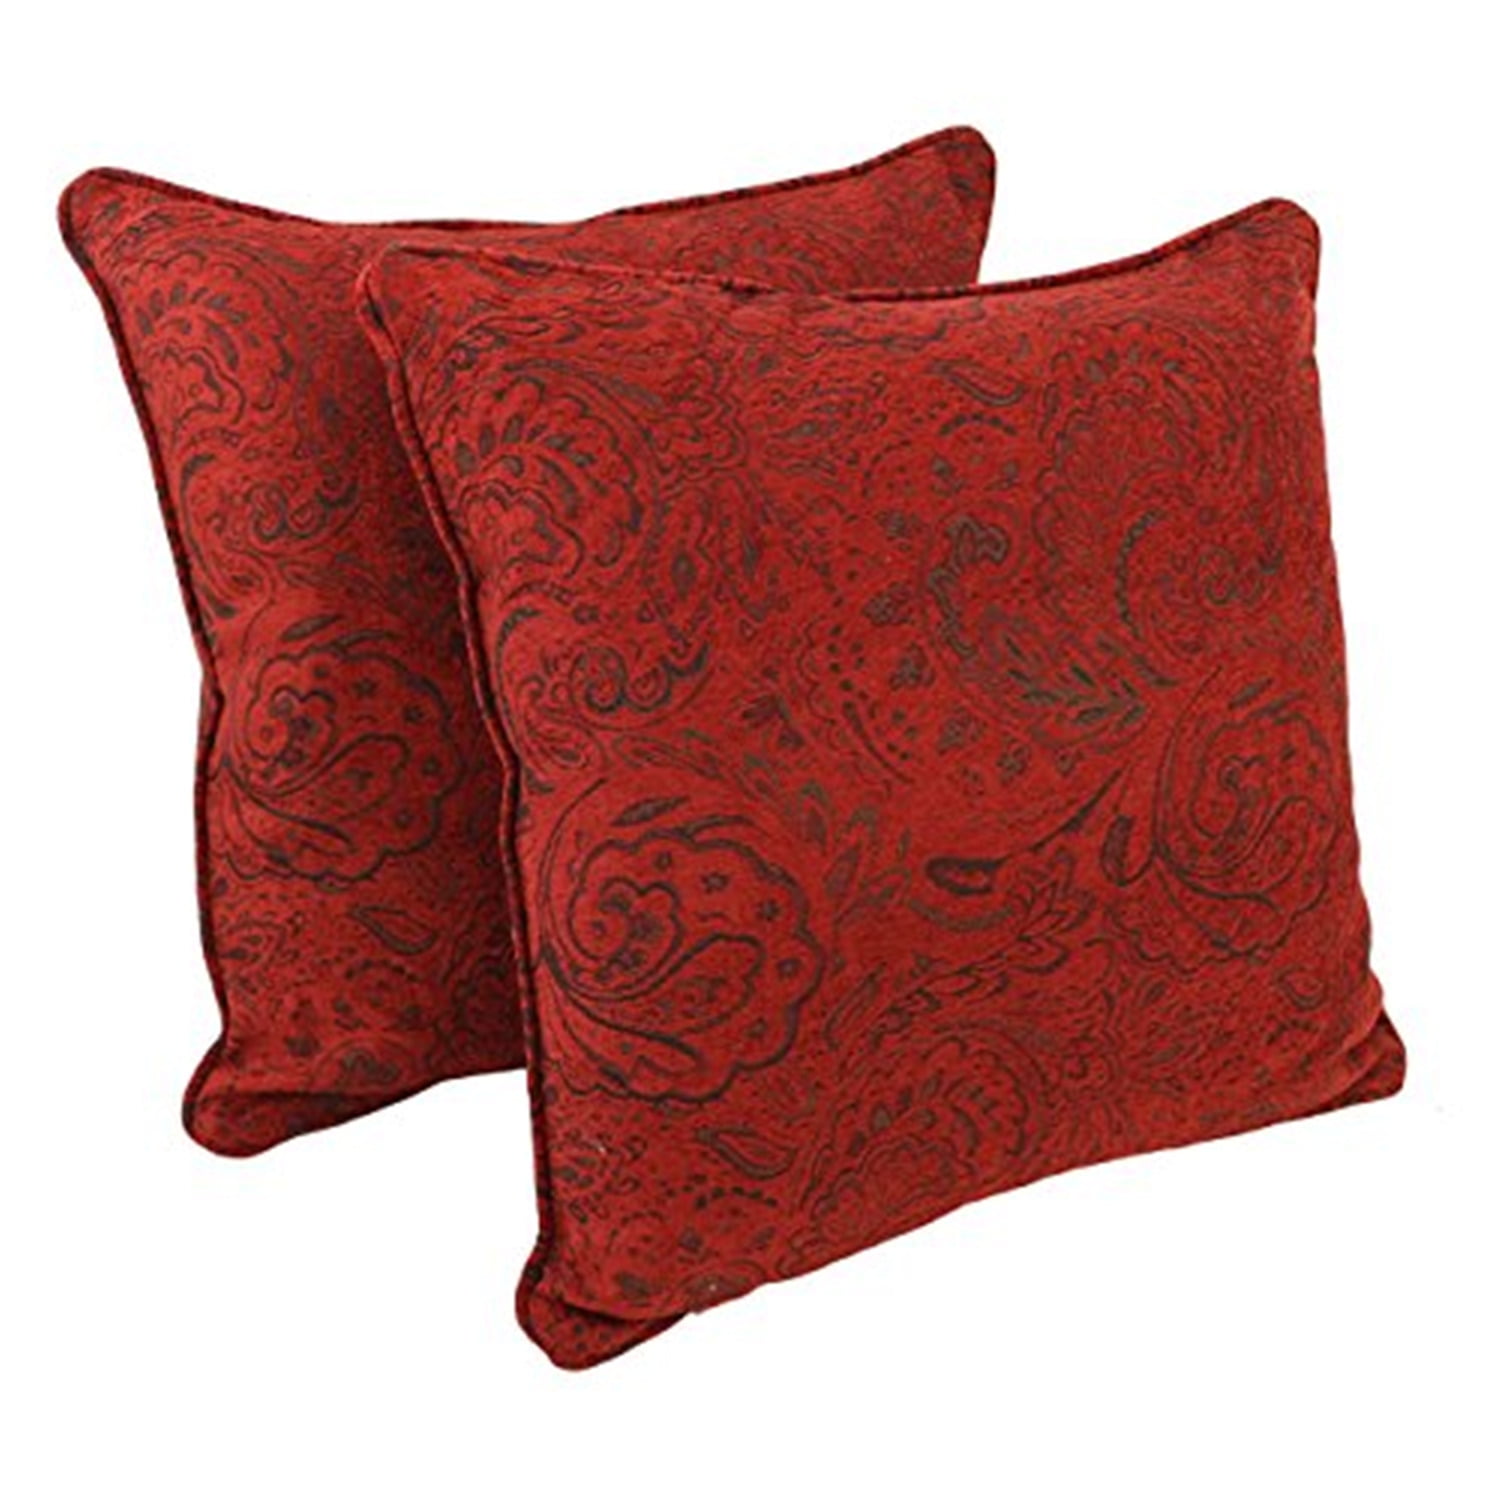 Picture of Blazing Needles 9813-CD-S2-JCH-CO-10 25 in. Double-Corded Patterned Jacquard Chenille Square Floor Pillows with Inserts, Scrolled Floral Red - Set of 2